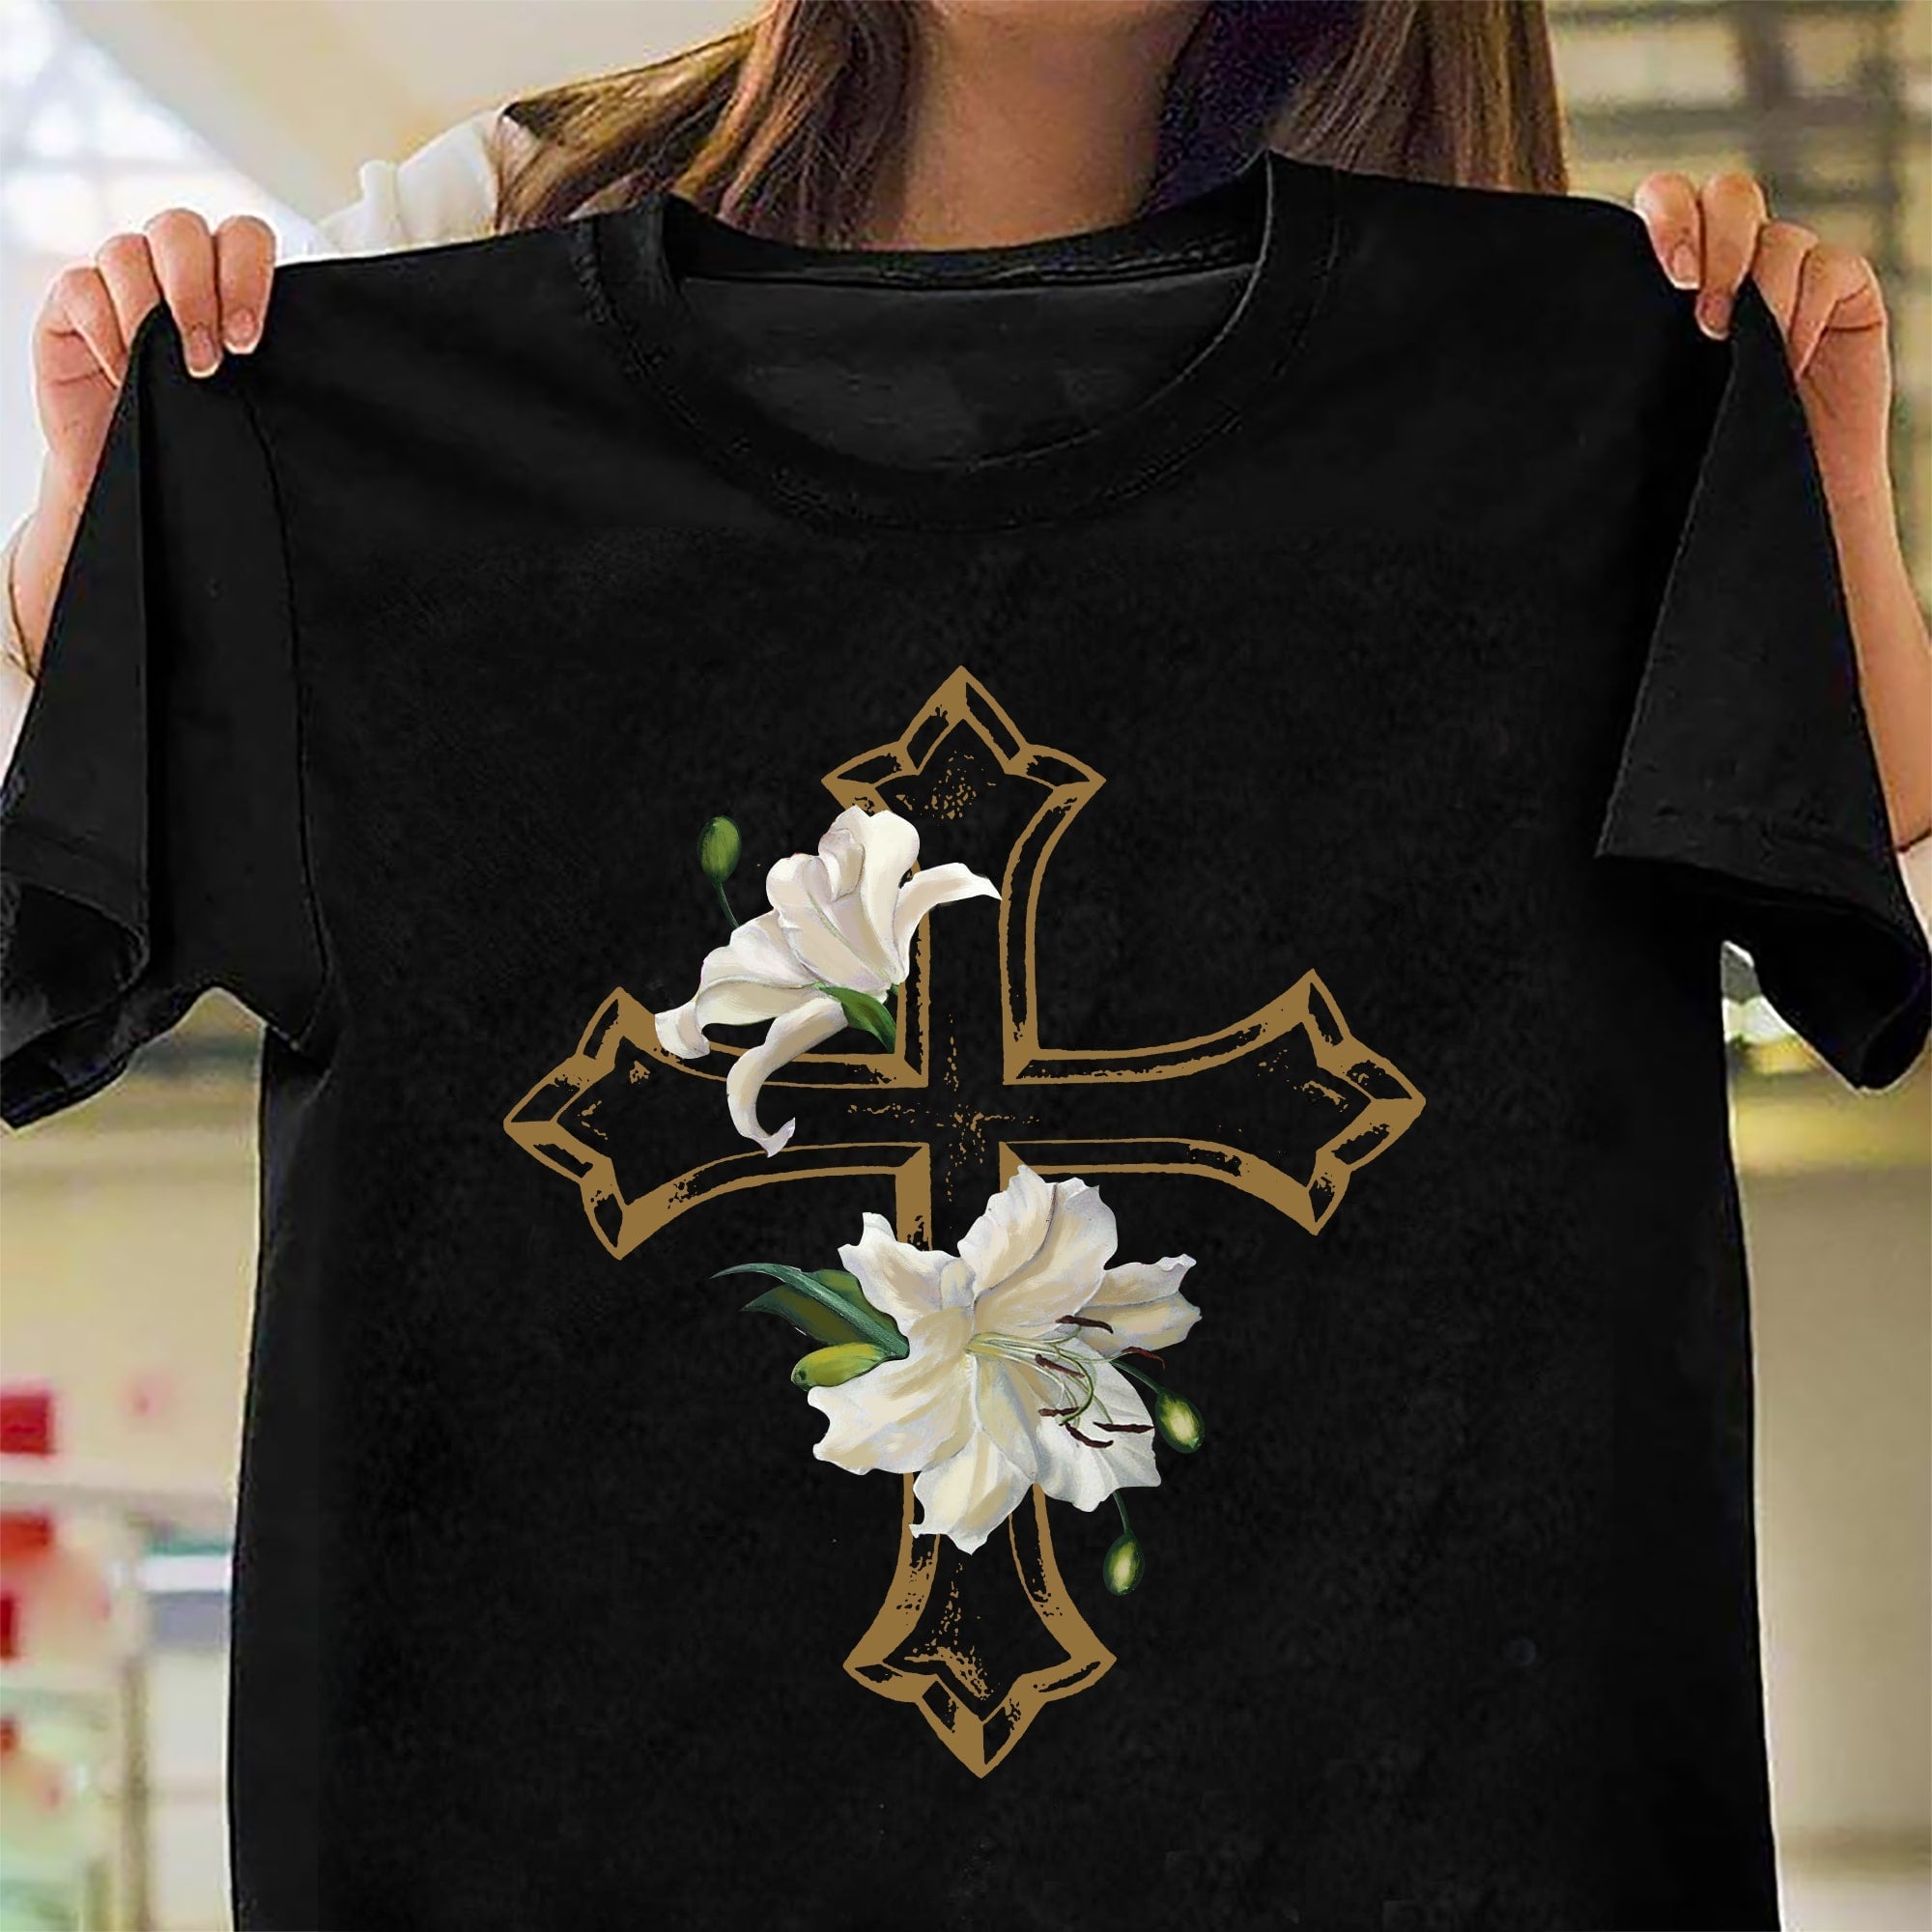 Lily and the cross – Jesus T Shirt